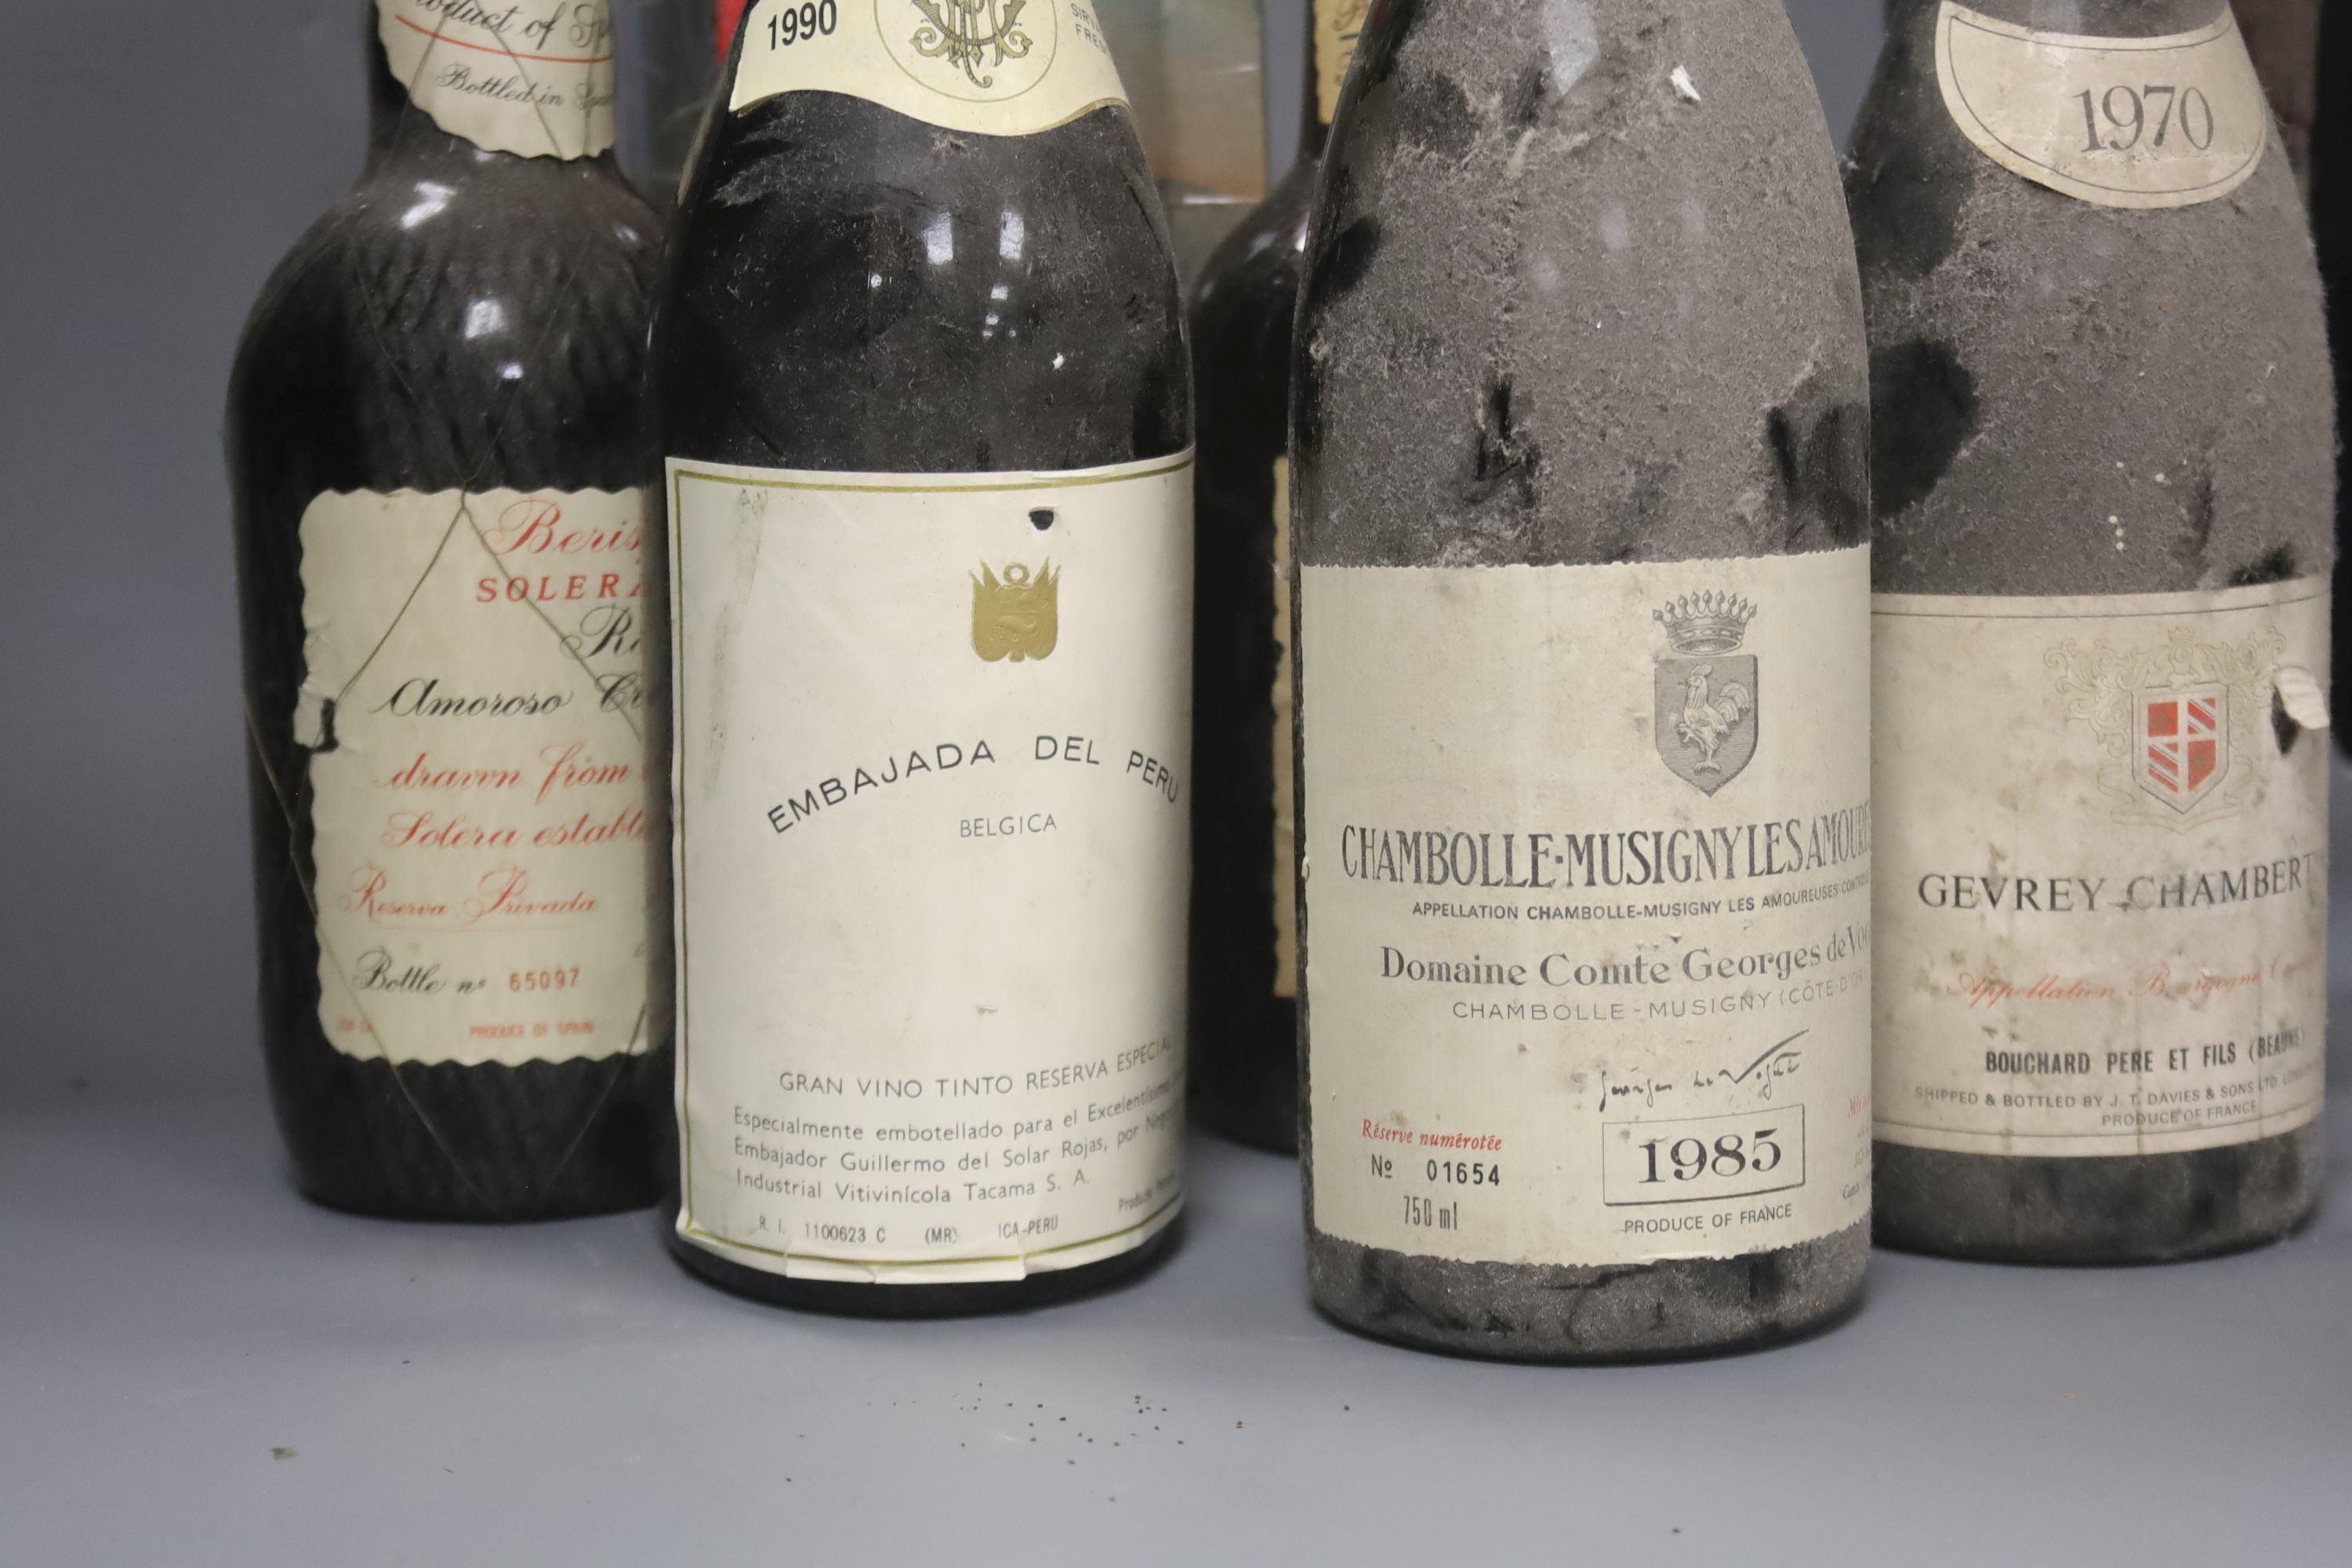 Assorted wines etc. including Chambolle Musigny Les Amoureuses, 1985, one Gevrey Chambertin, 1970, one Manzanilla Pasada Solera, one Amoroso Cream Sherry, one Embajada Del Peru, 1990, one Muscat de Rivesaltes and one box